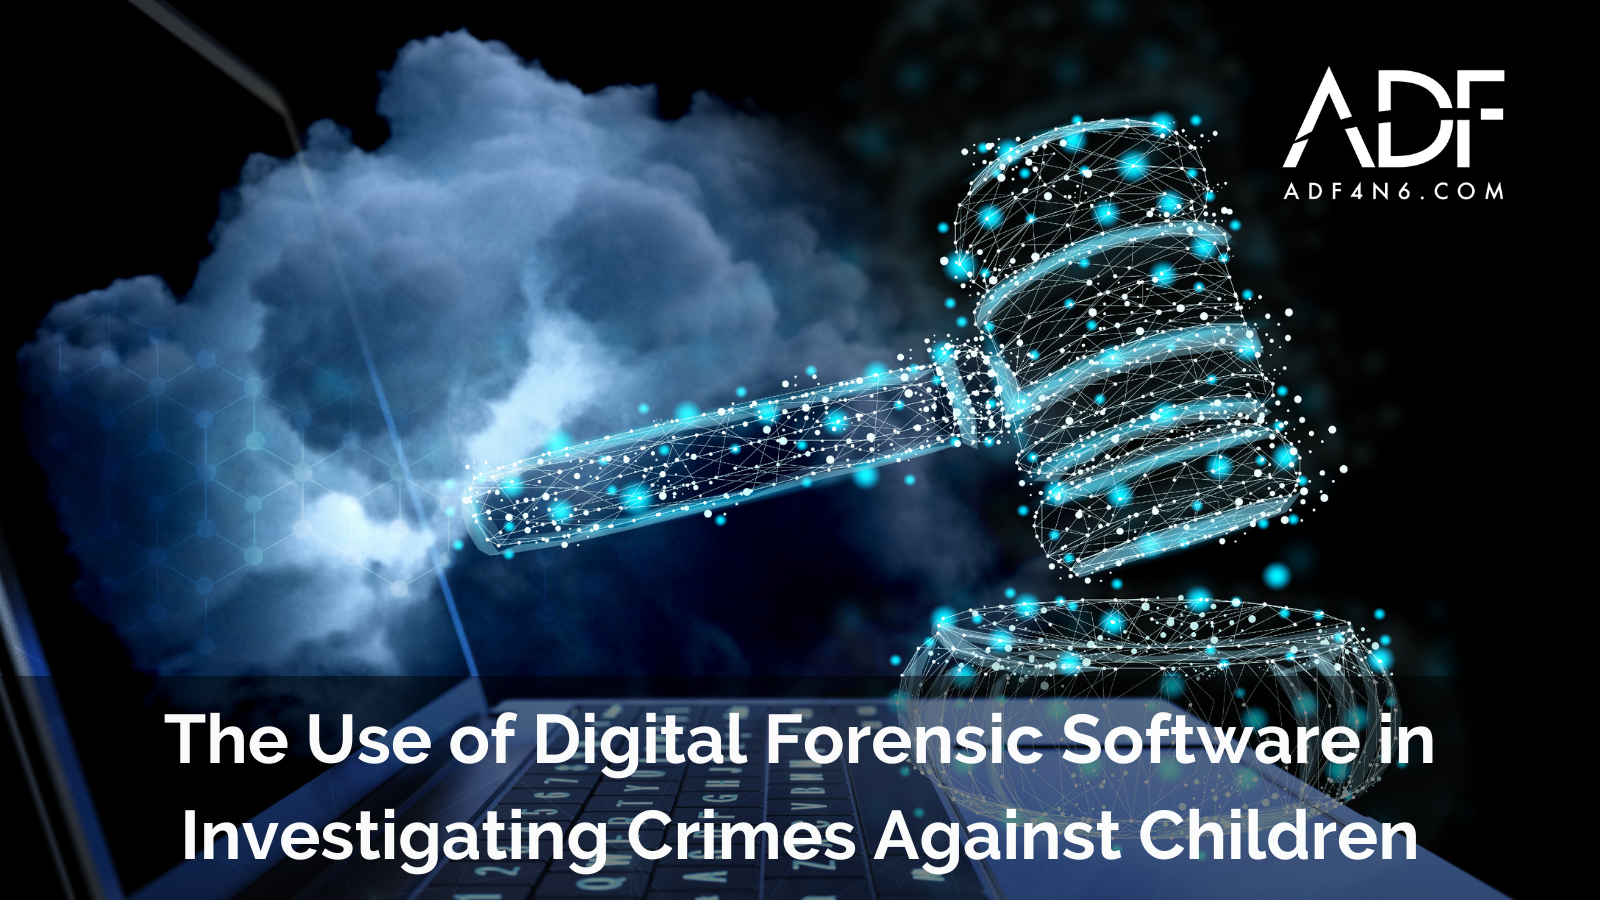 The Use of Digital Forensic Software in Investigating Crimes Against Children